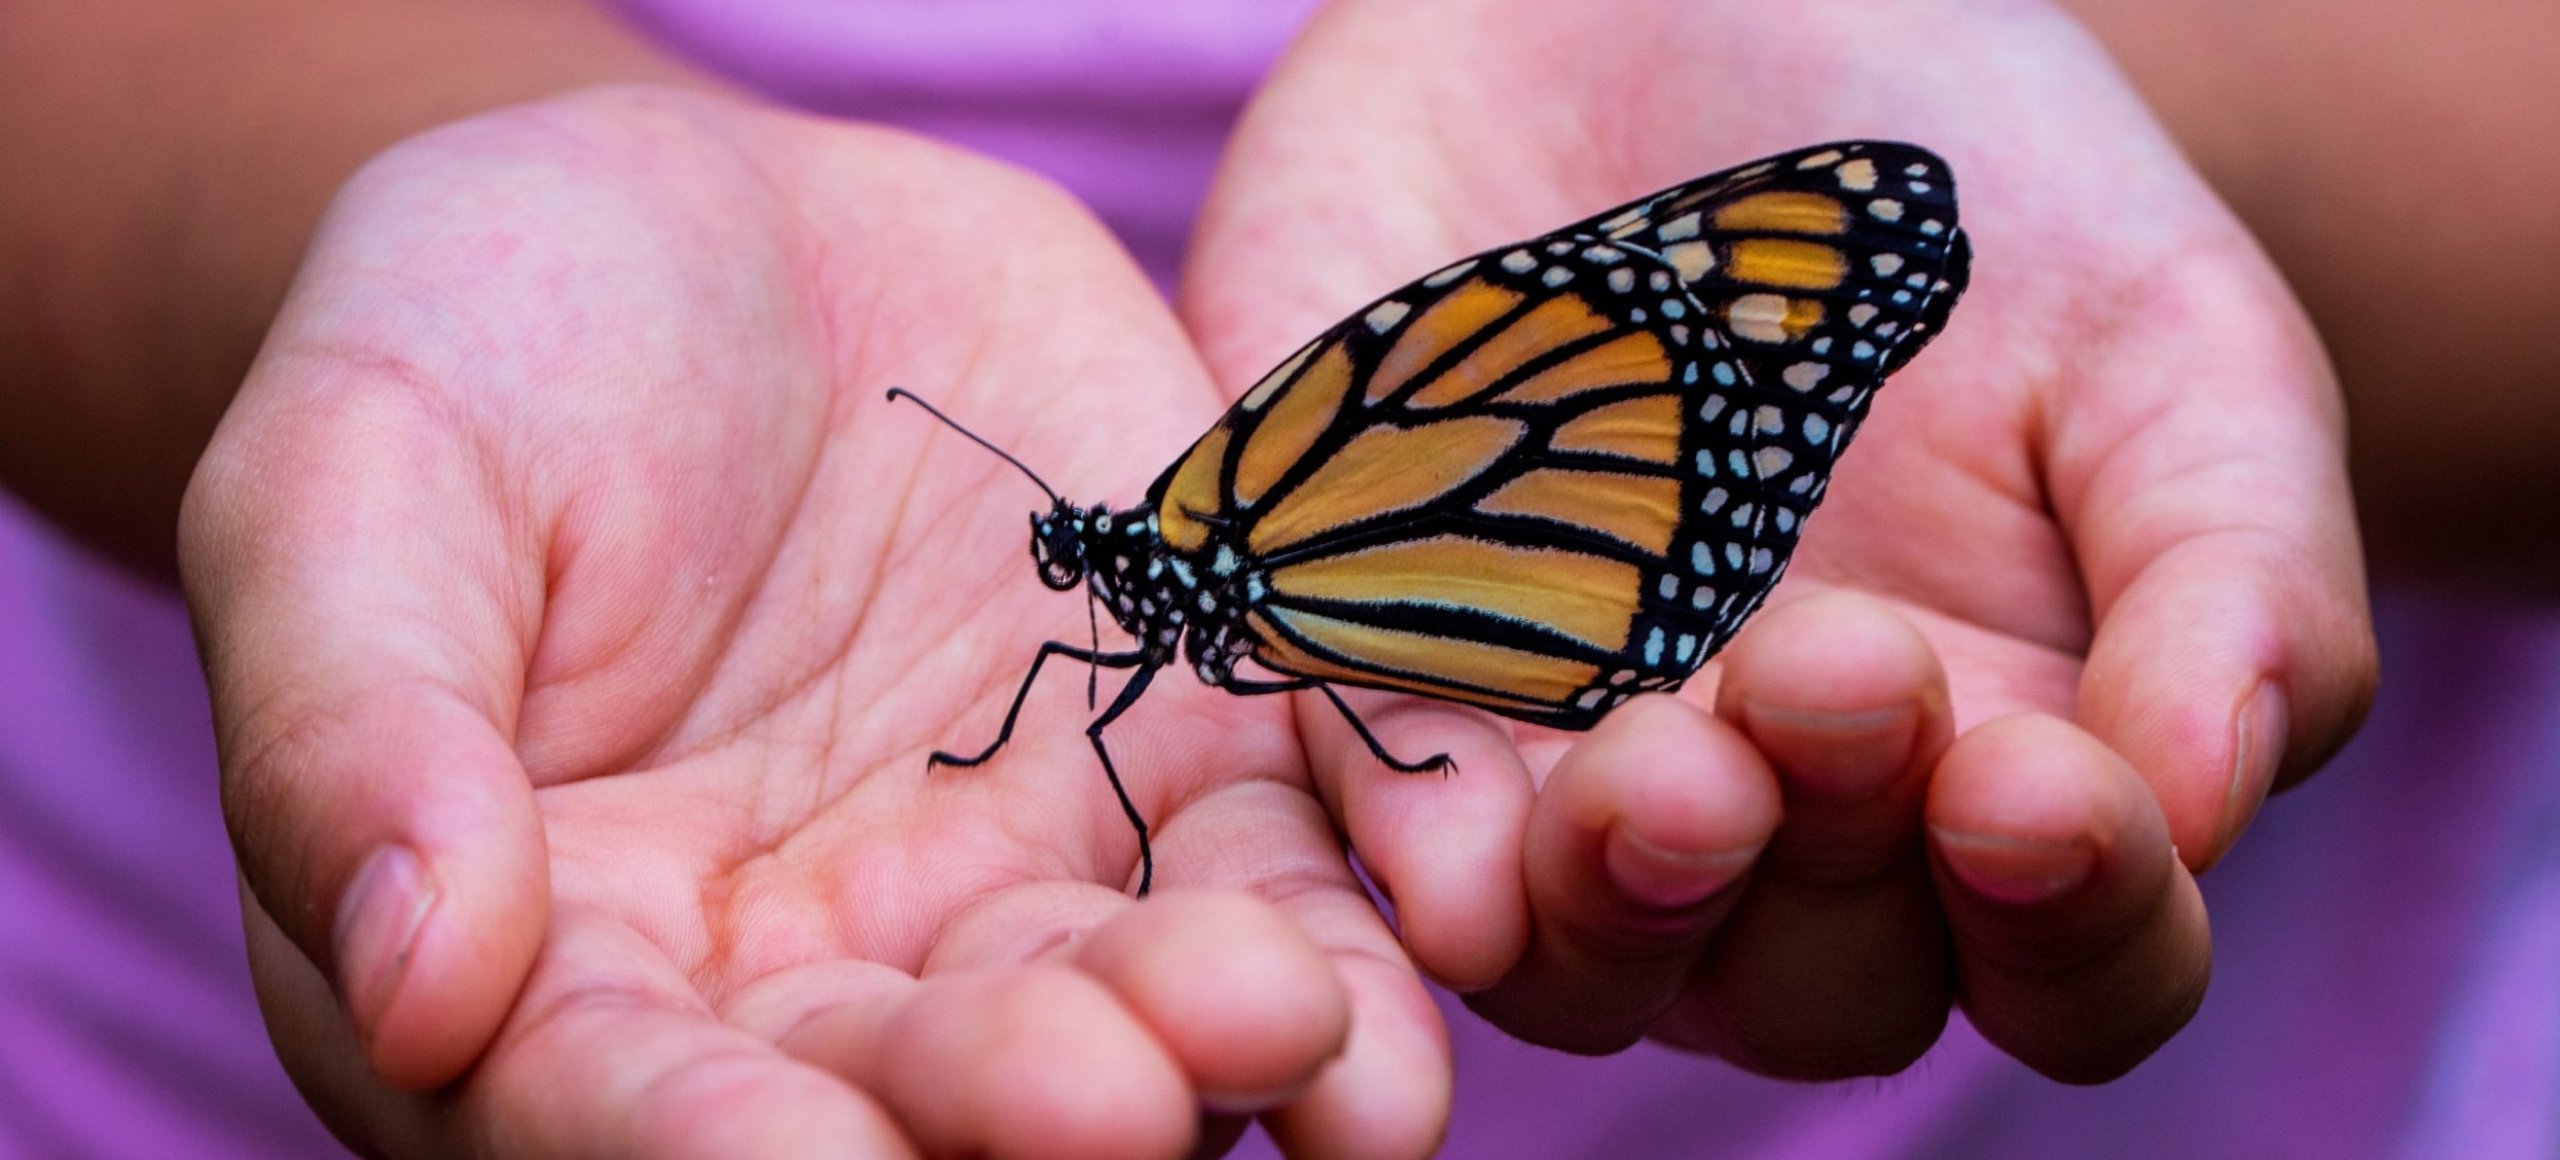 Close up of a child's hands holding a monarch butterfly